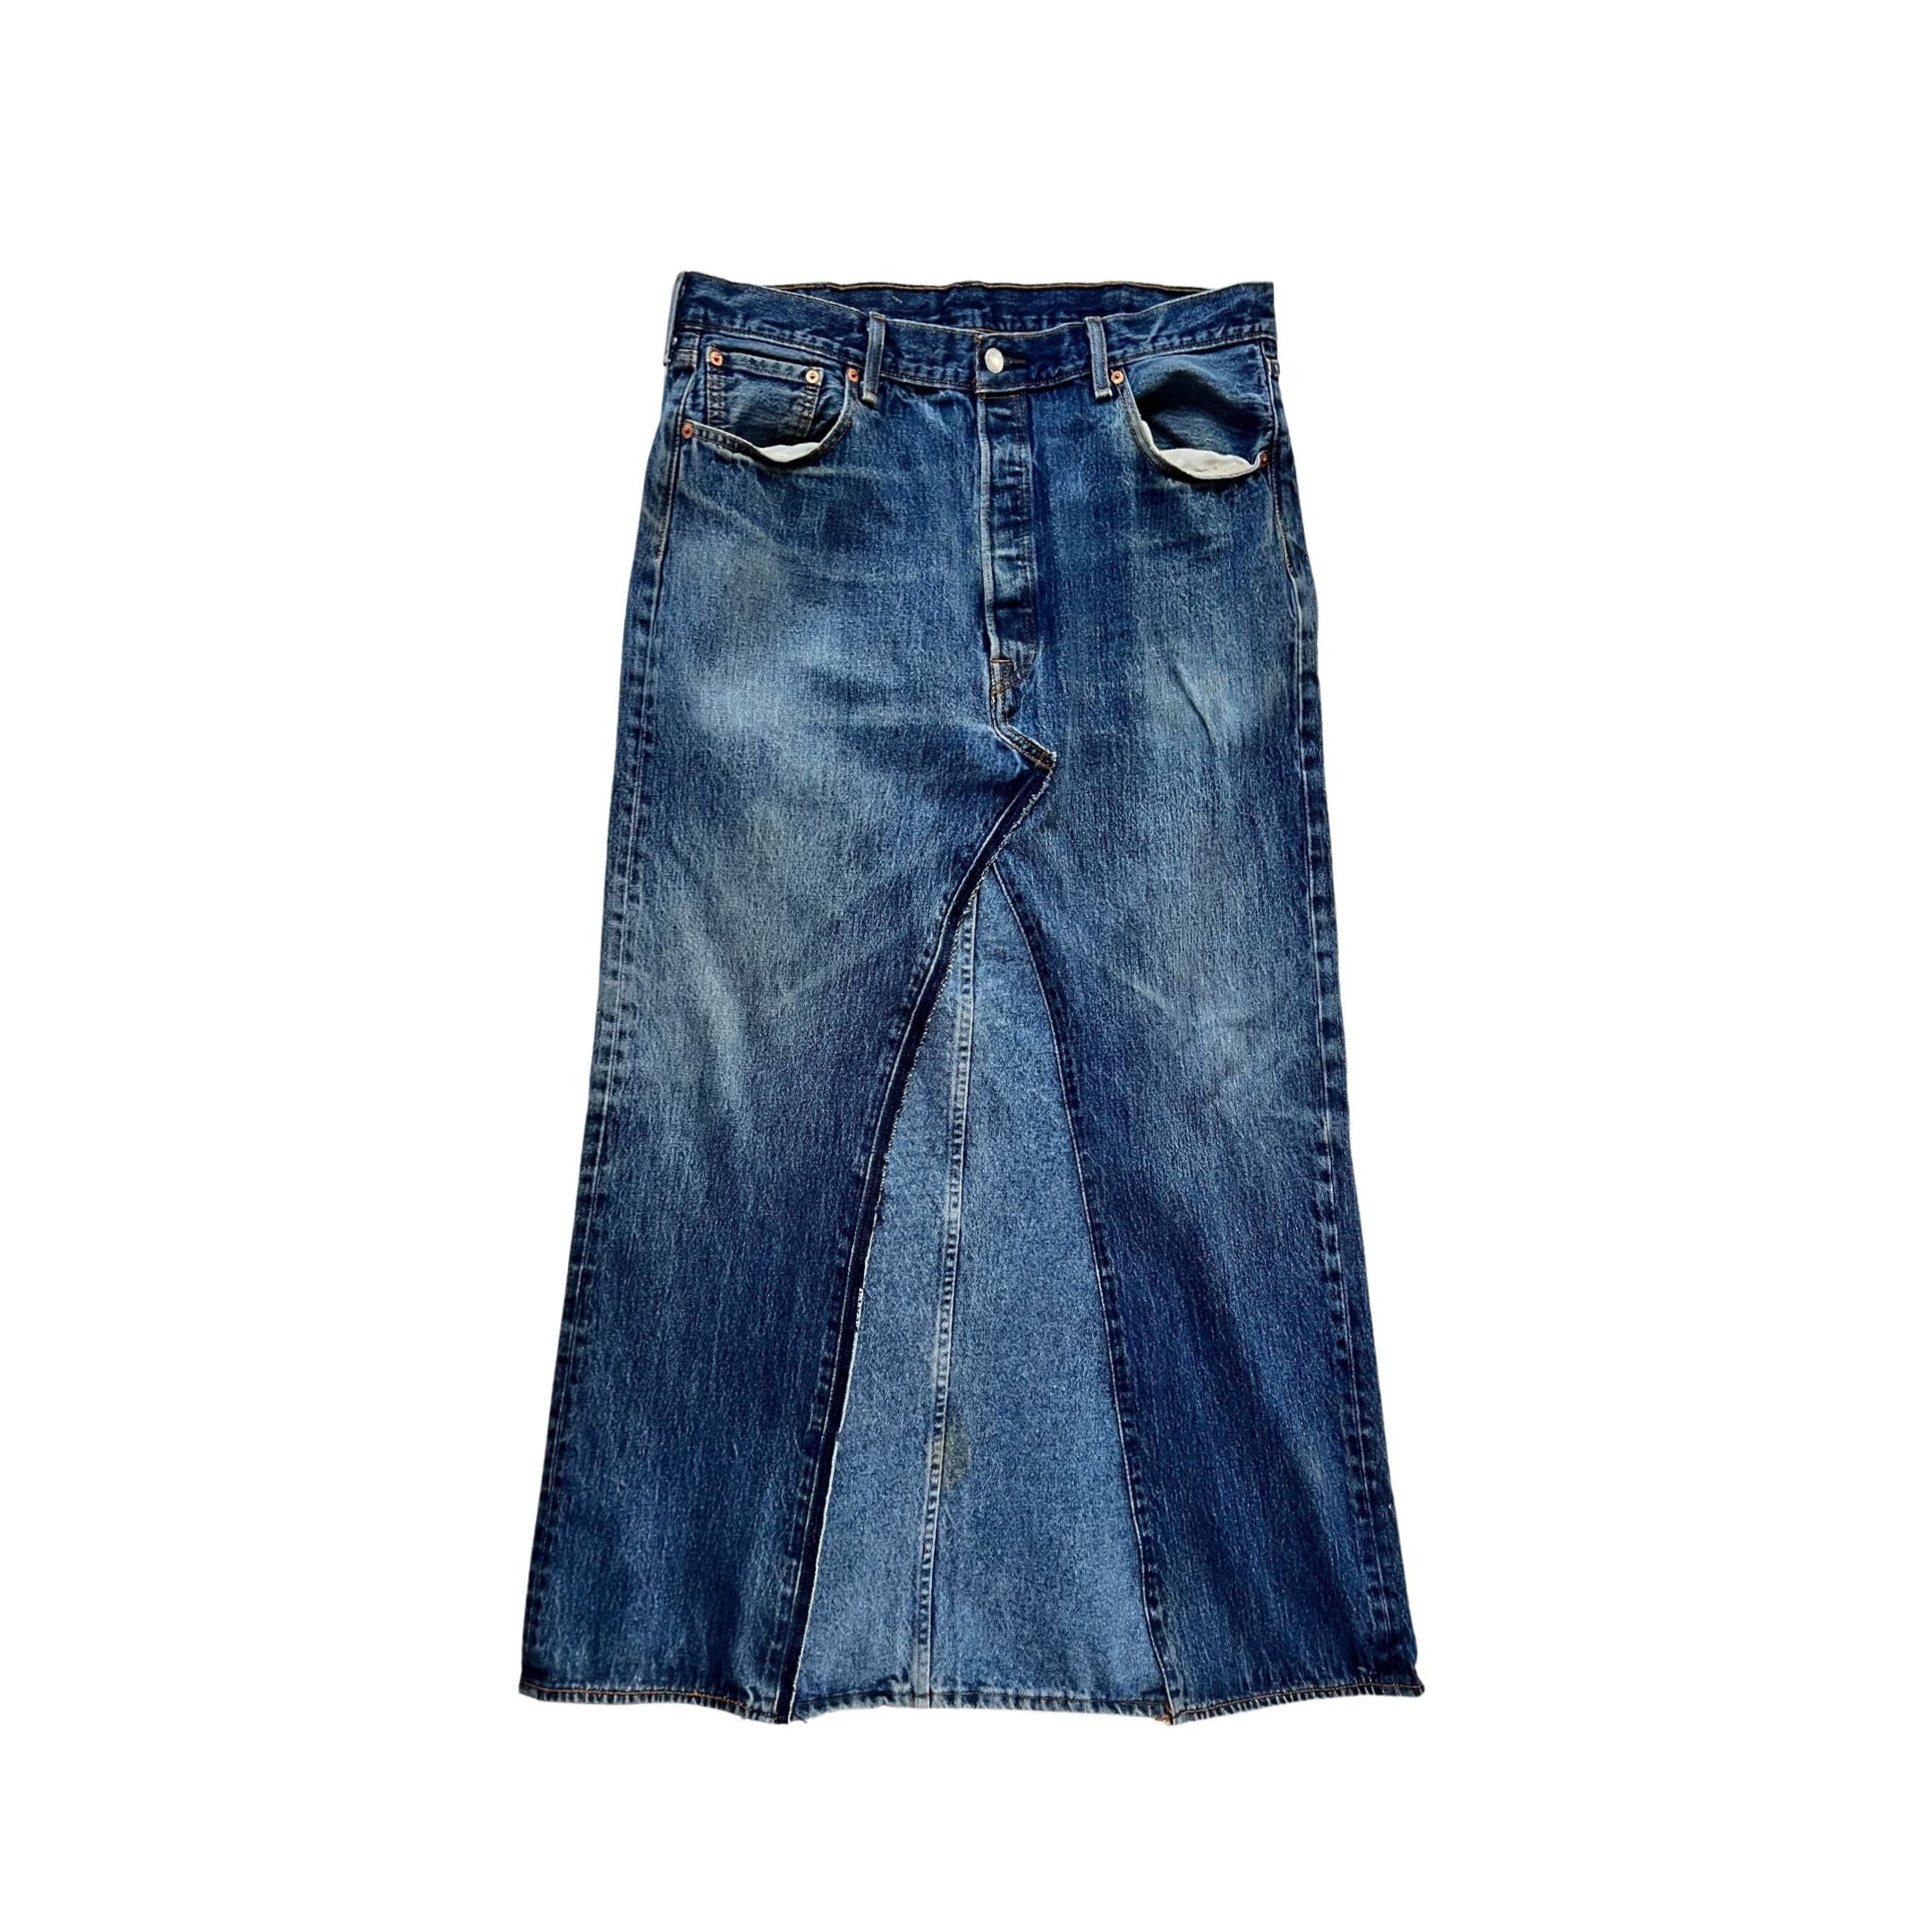 This Denim maxi is the ultimate in street smart style. Made with up-cycled jeans.  Every skirt is hand constructed from two pairs of jeans, making each piece unique and one of a kind.   Totally authentic and sustainable to